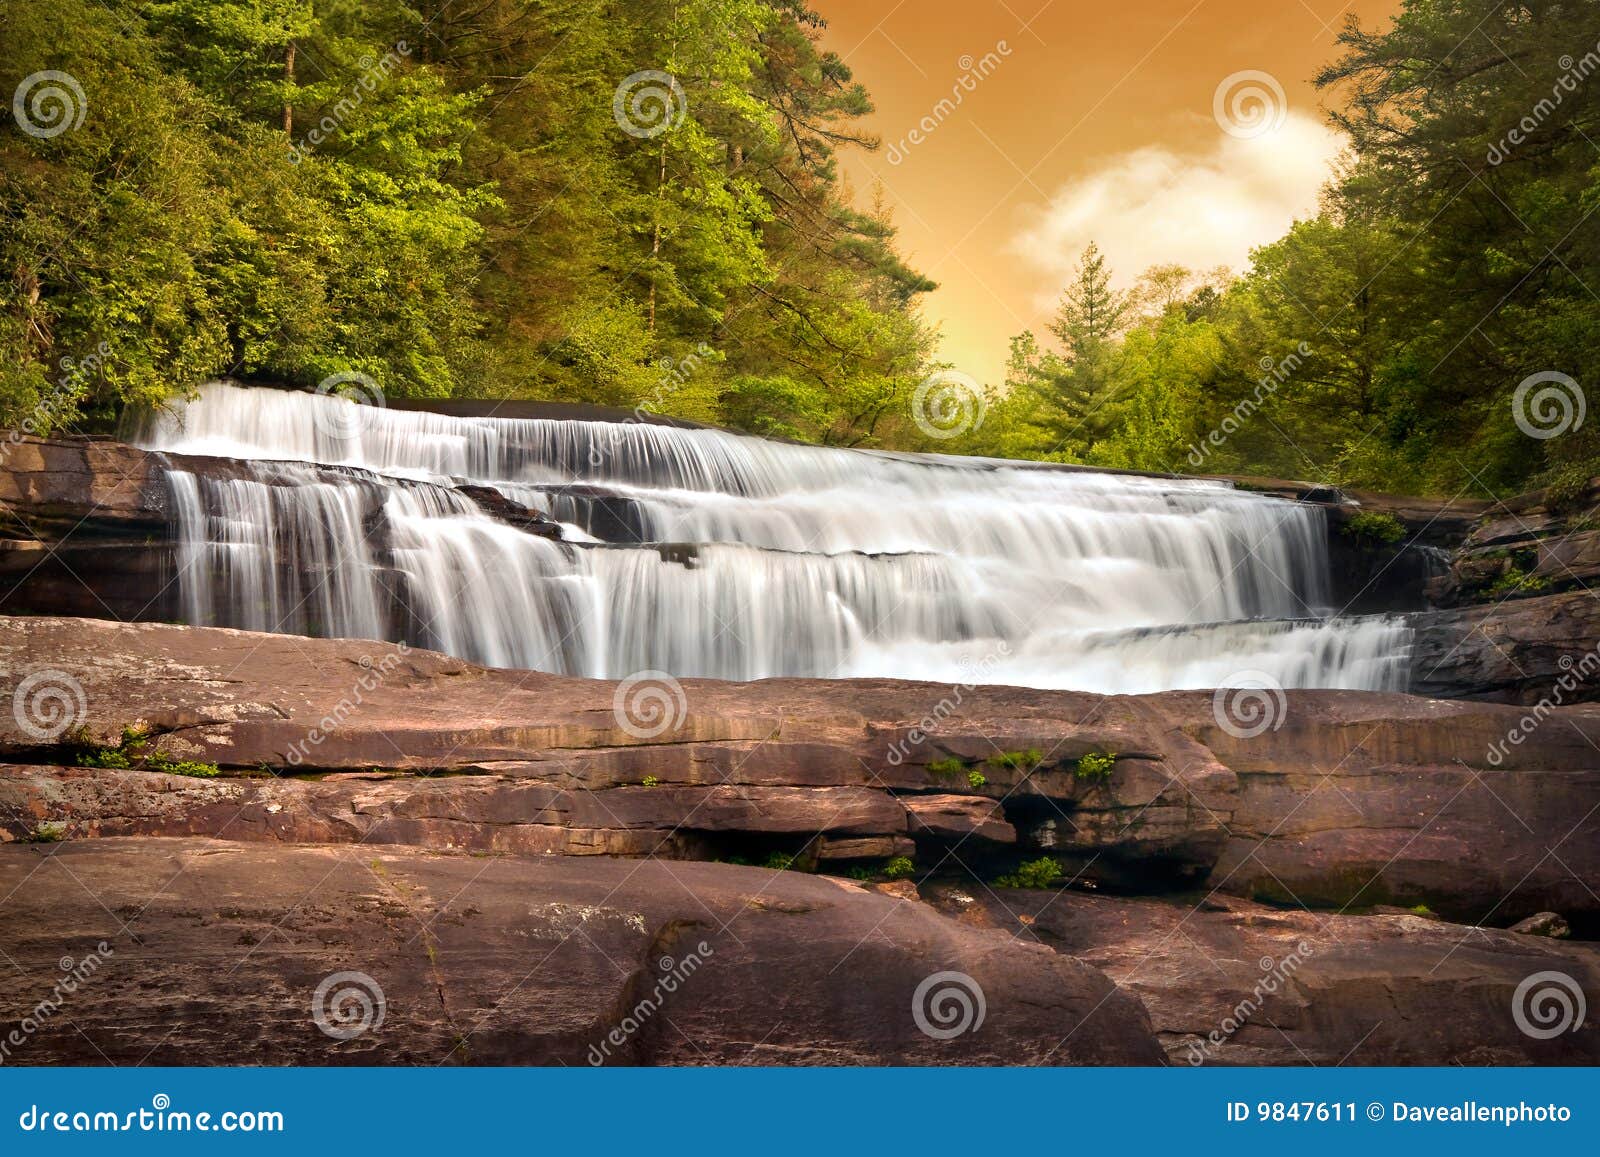 waterfalls nature landscape in mountains sunset